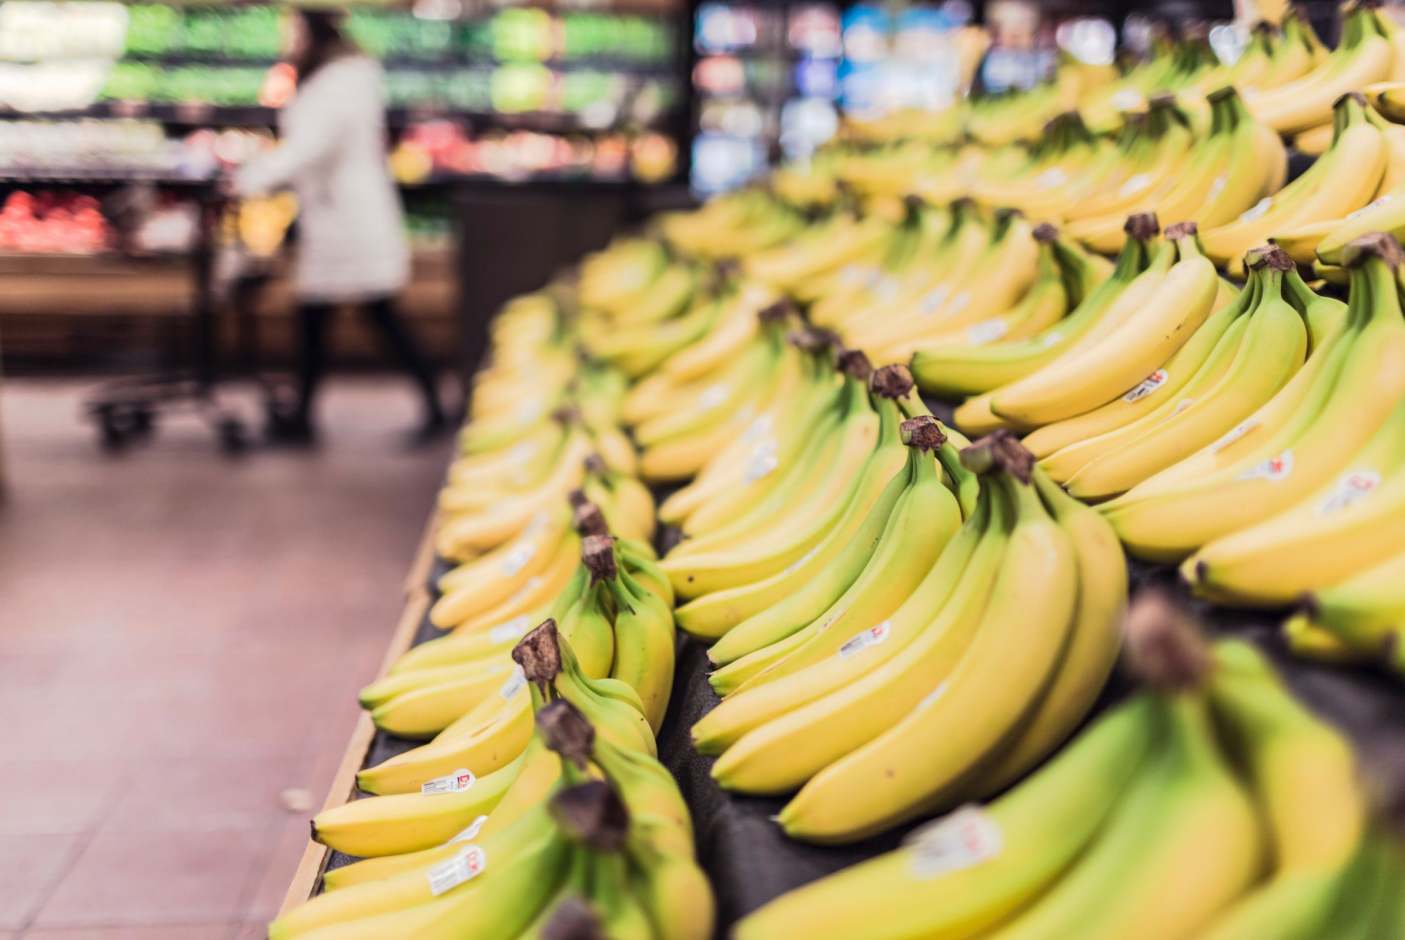 Organic Banana Industry Still Suffering with Low Prices